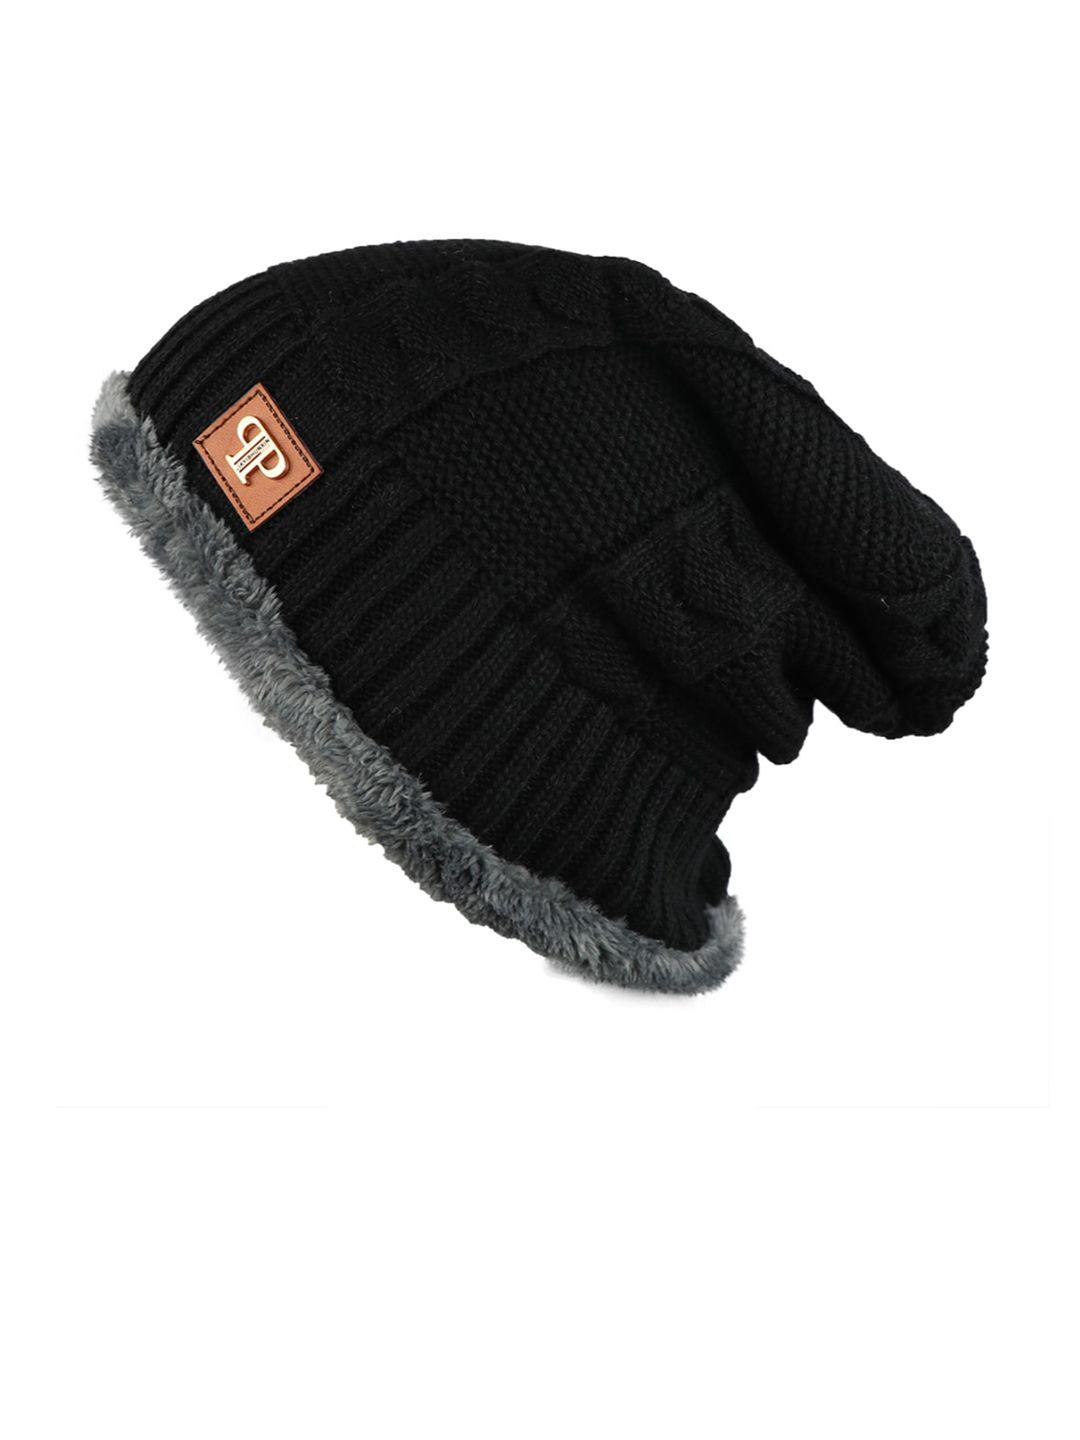 isweven unisex black self-design woven expandable beanie